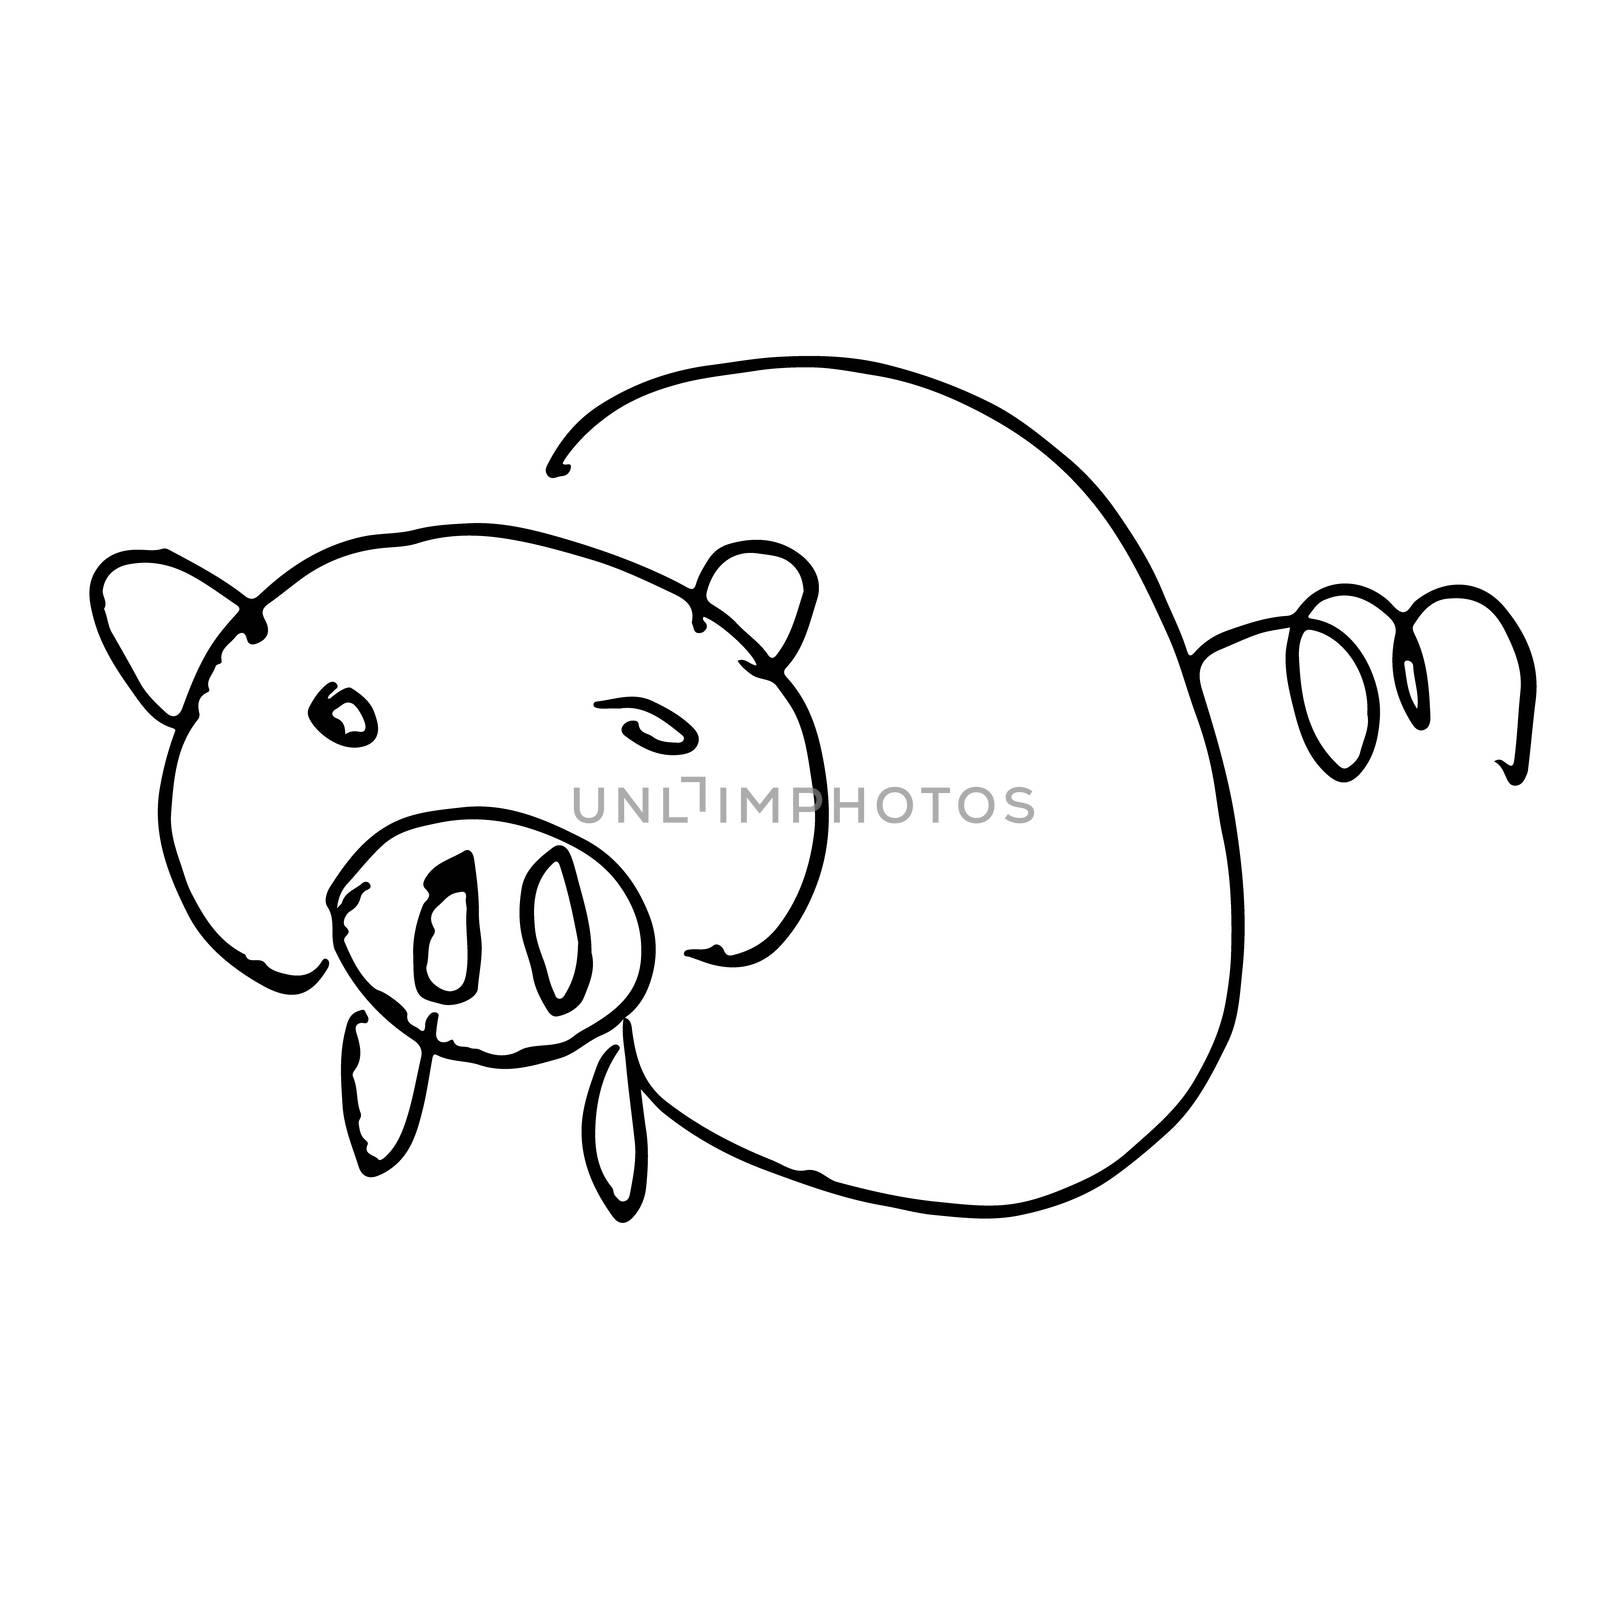 freehand sketch illustration of pig doodle hand drawn in kid style